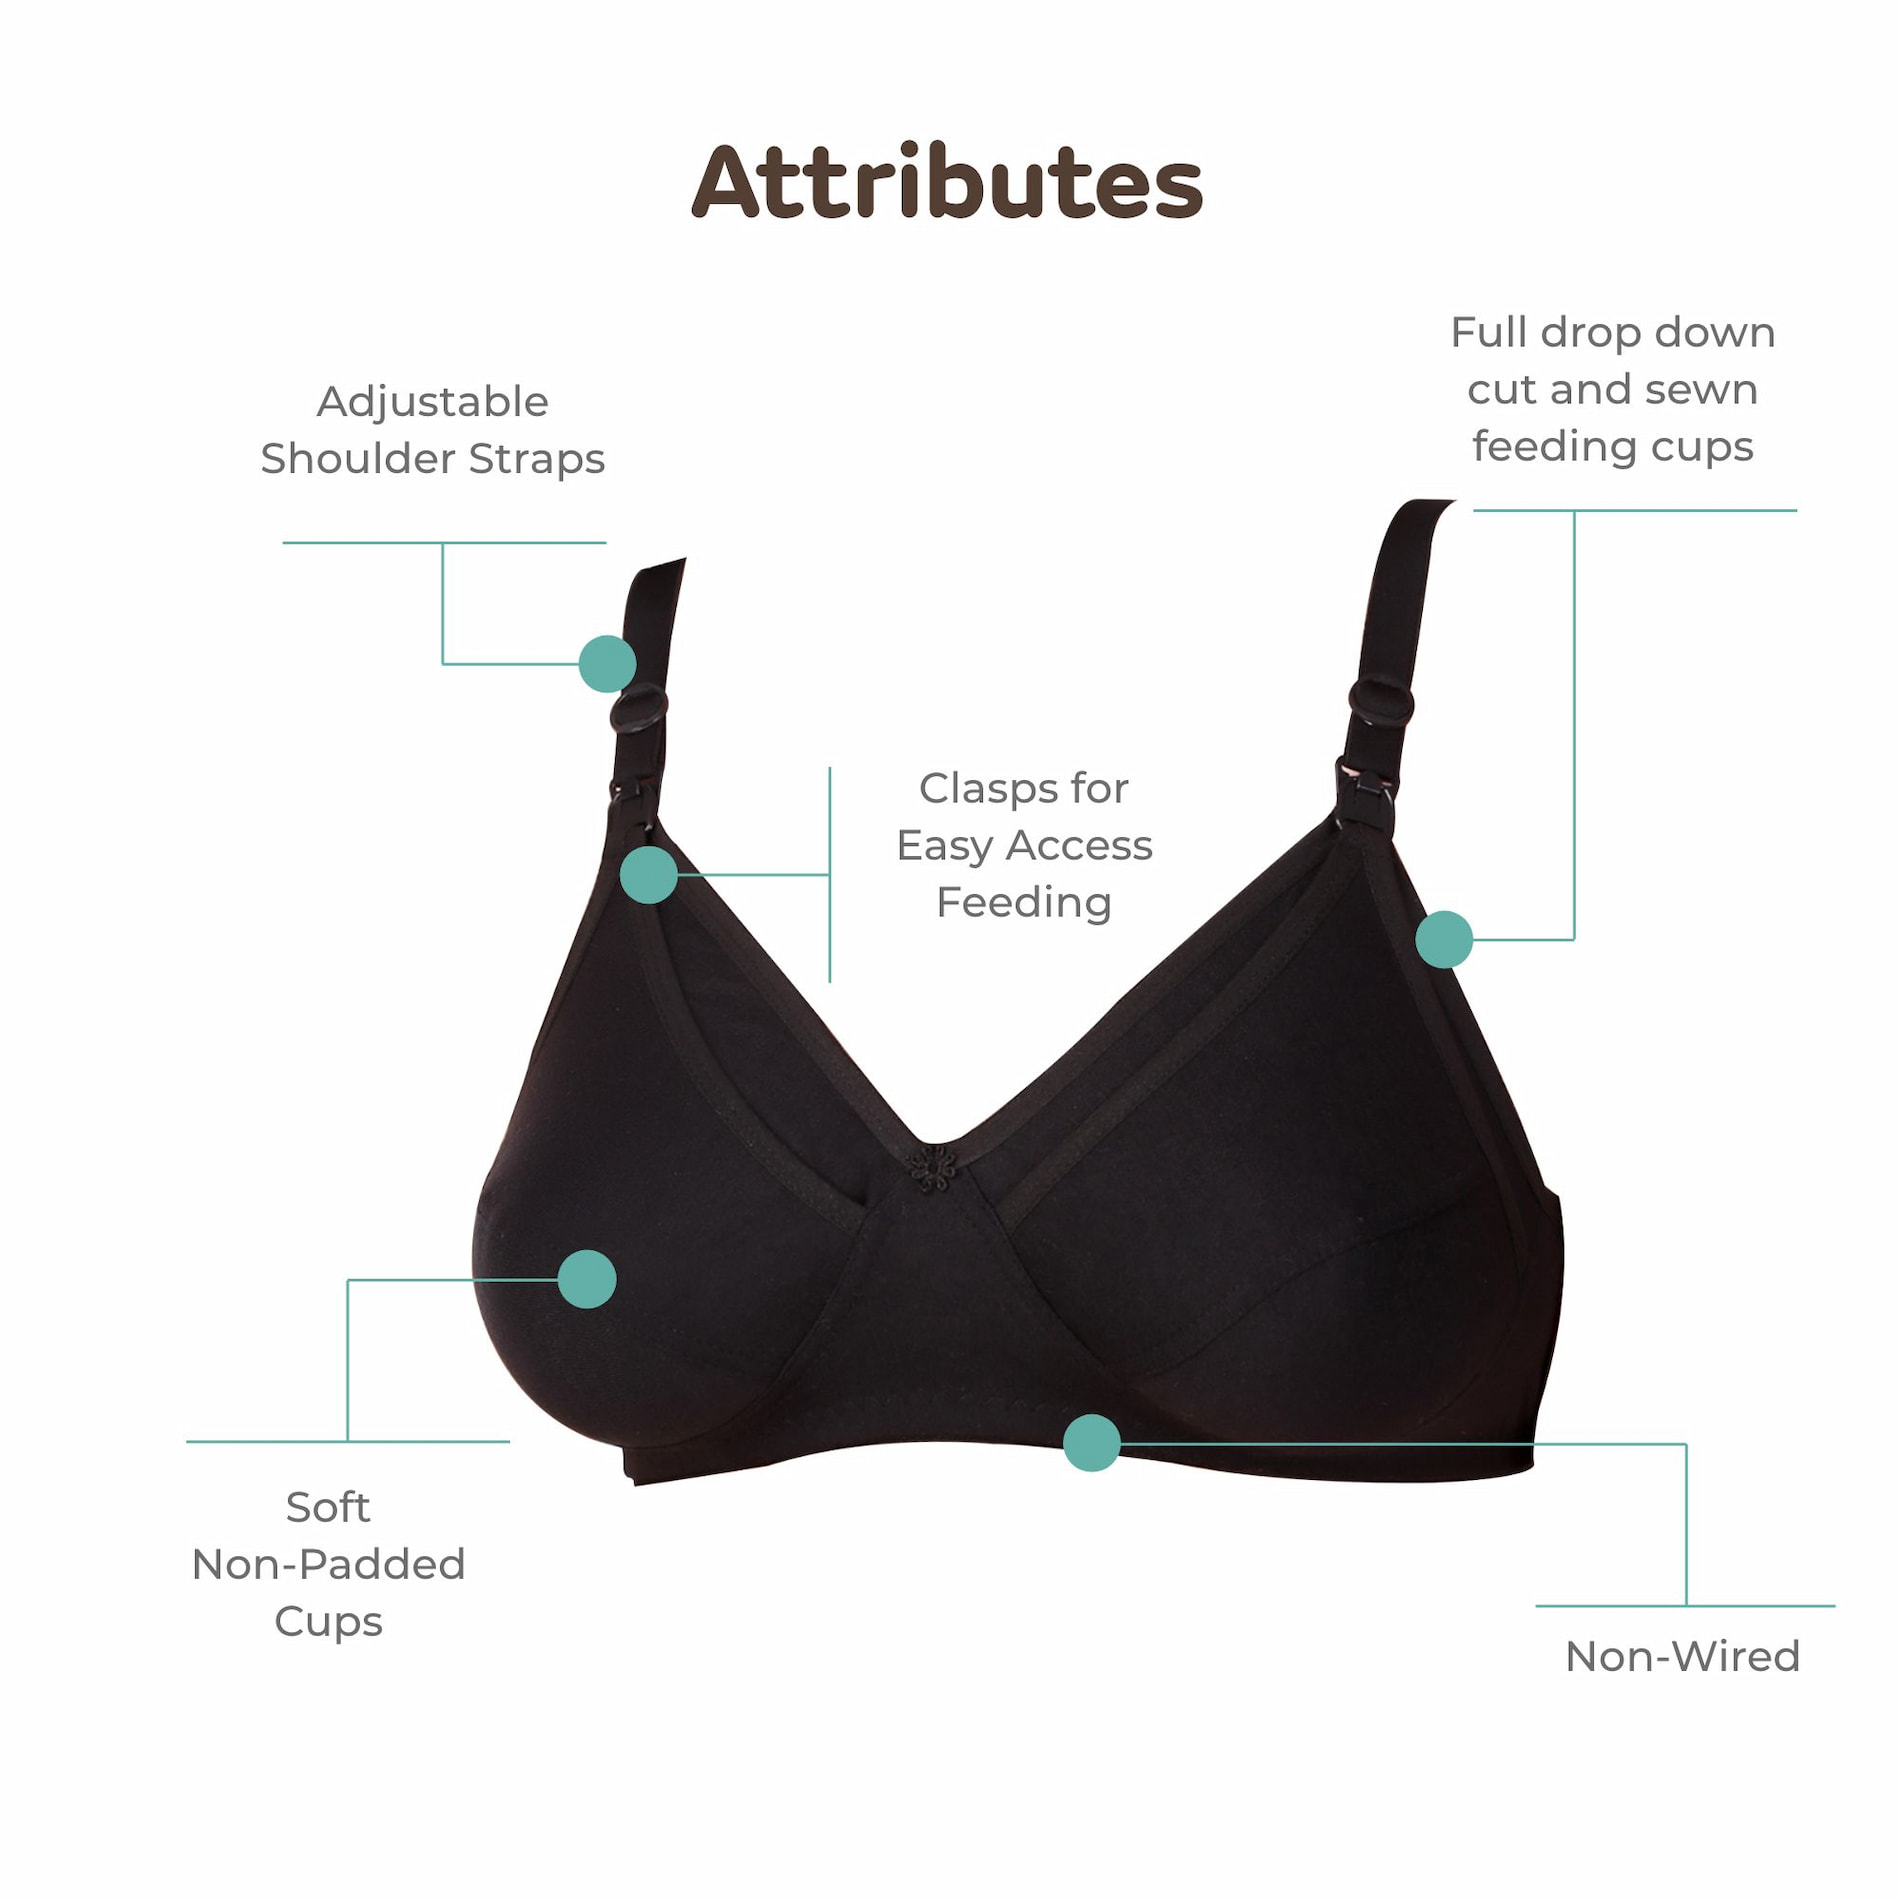 Maternity/Nursing Bras Non-Wired, Non-Padded with free Bra Extender - Classic Black 34 B 